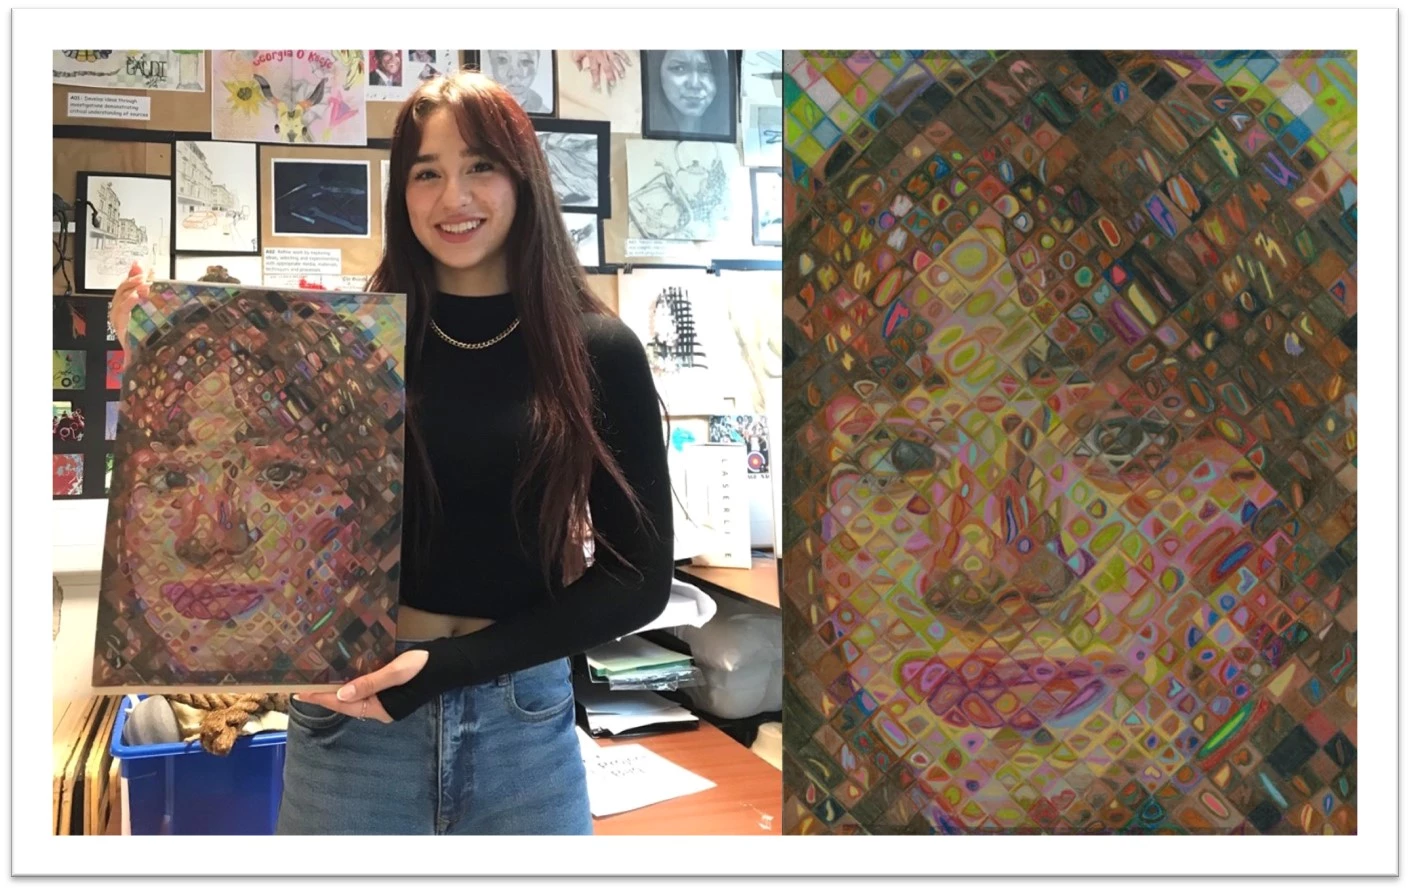 Abbey College Manchester student Saba pictured with her award-winning work.